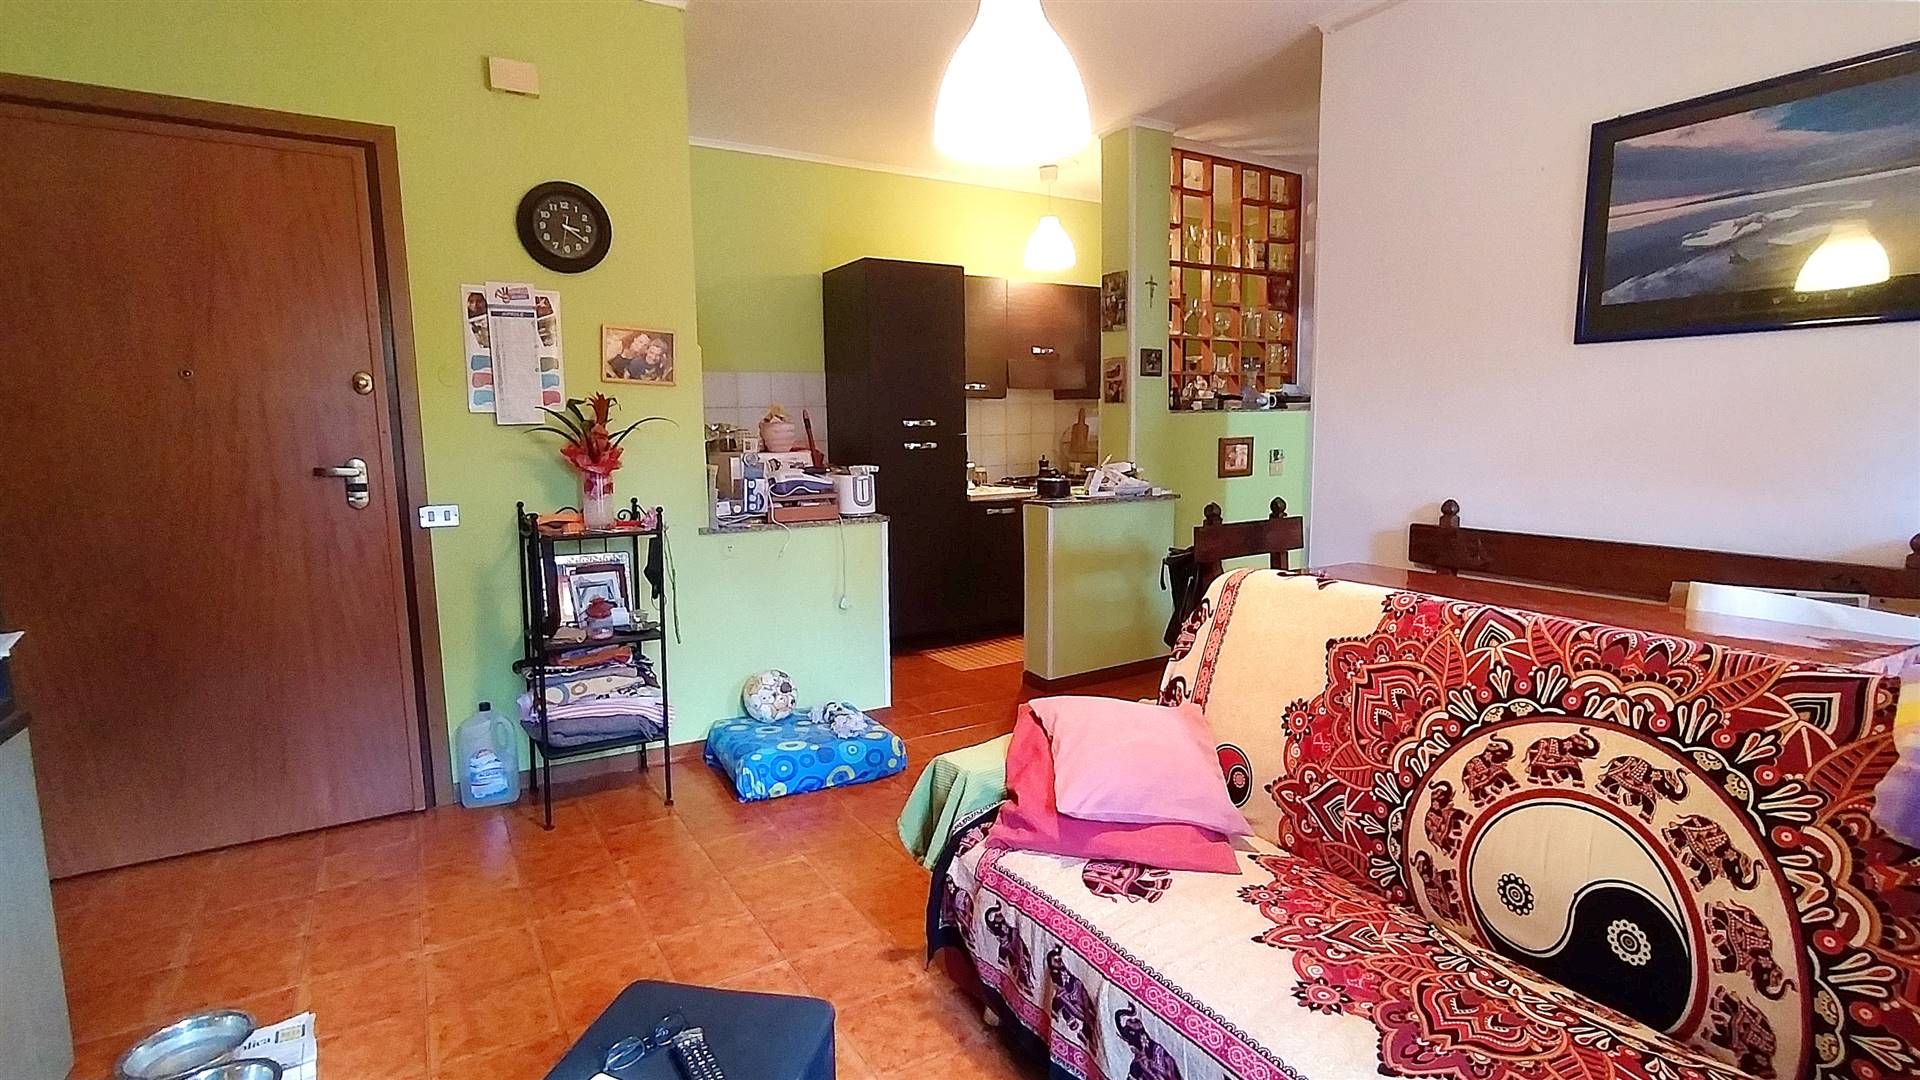 COLLEVECCHIO, Apartment for sale of 55 Sq. mt., Good condition, Heating Individual heating system, Energetic class: G, Epi: 175 kwh/m2 year, placed 